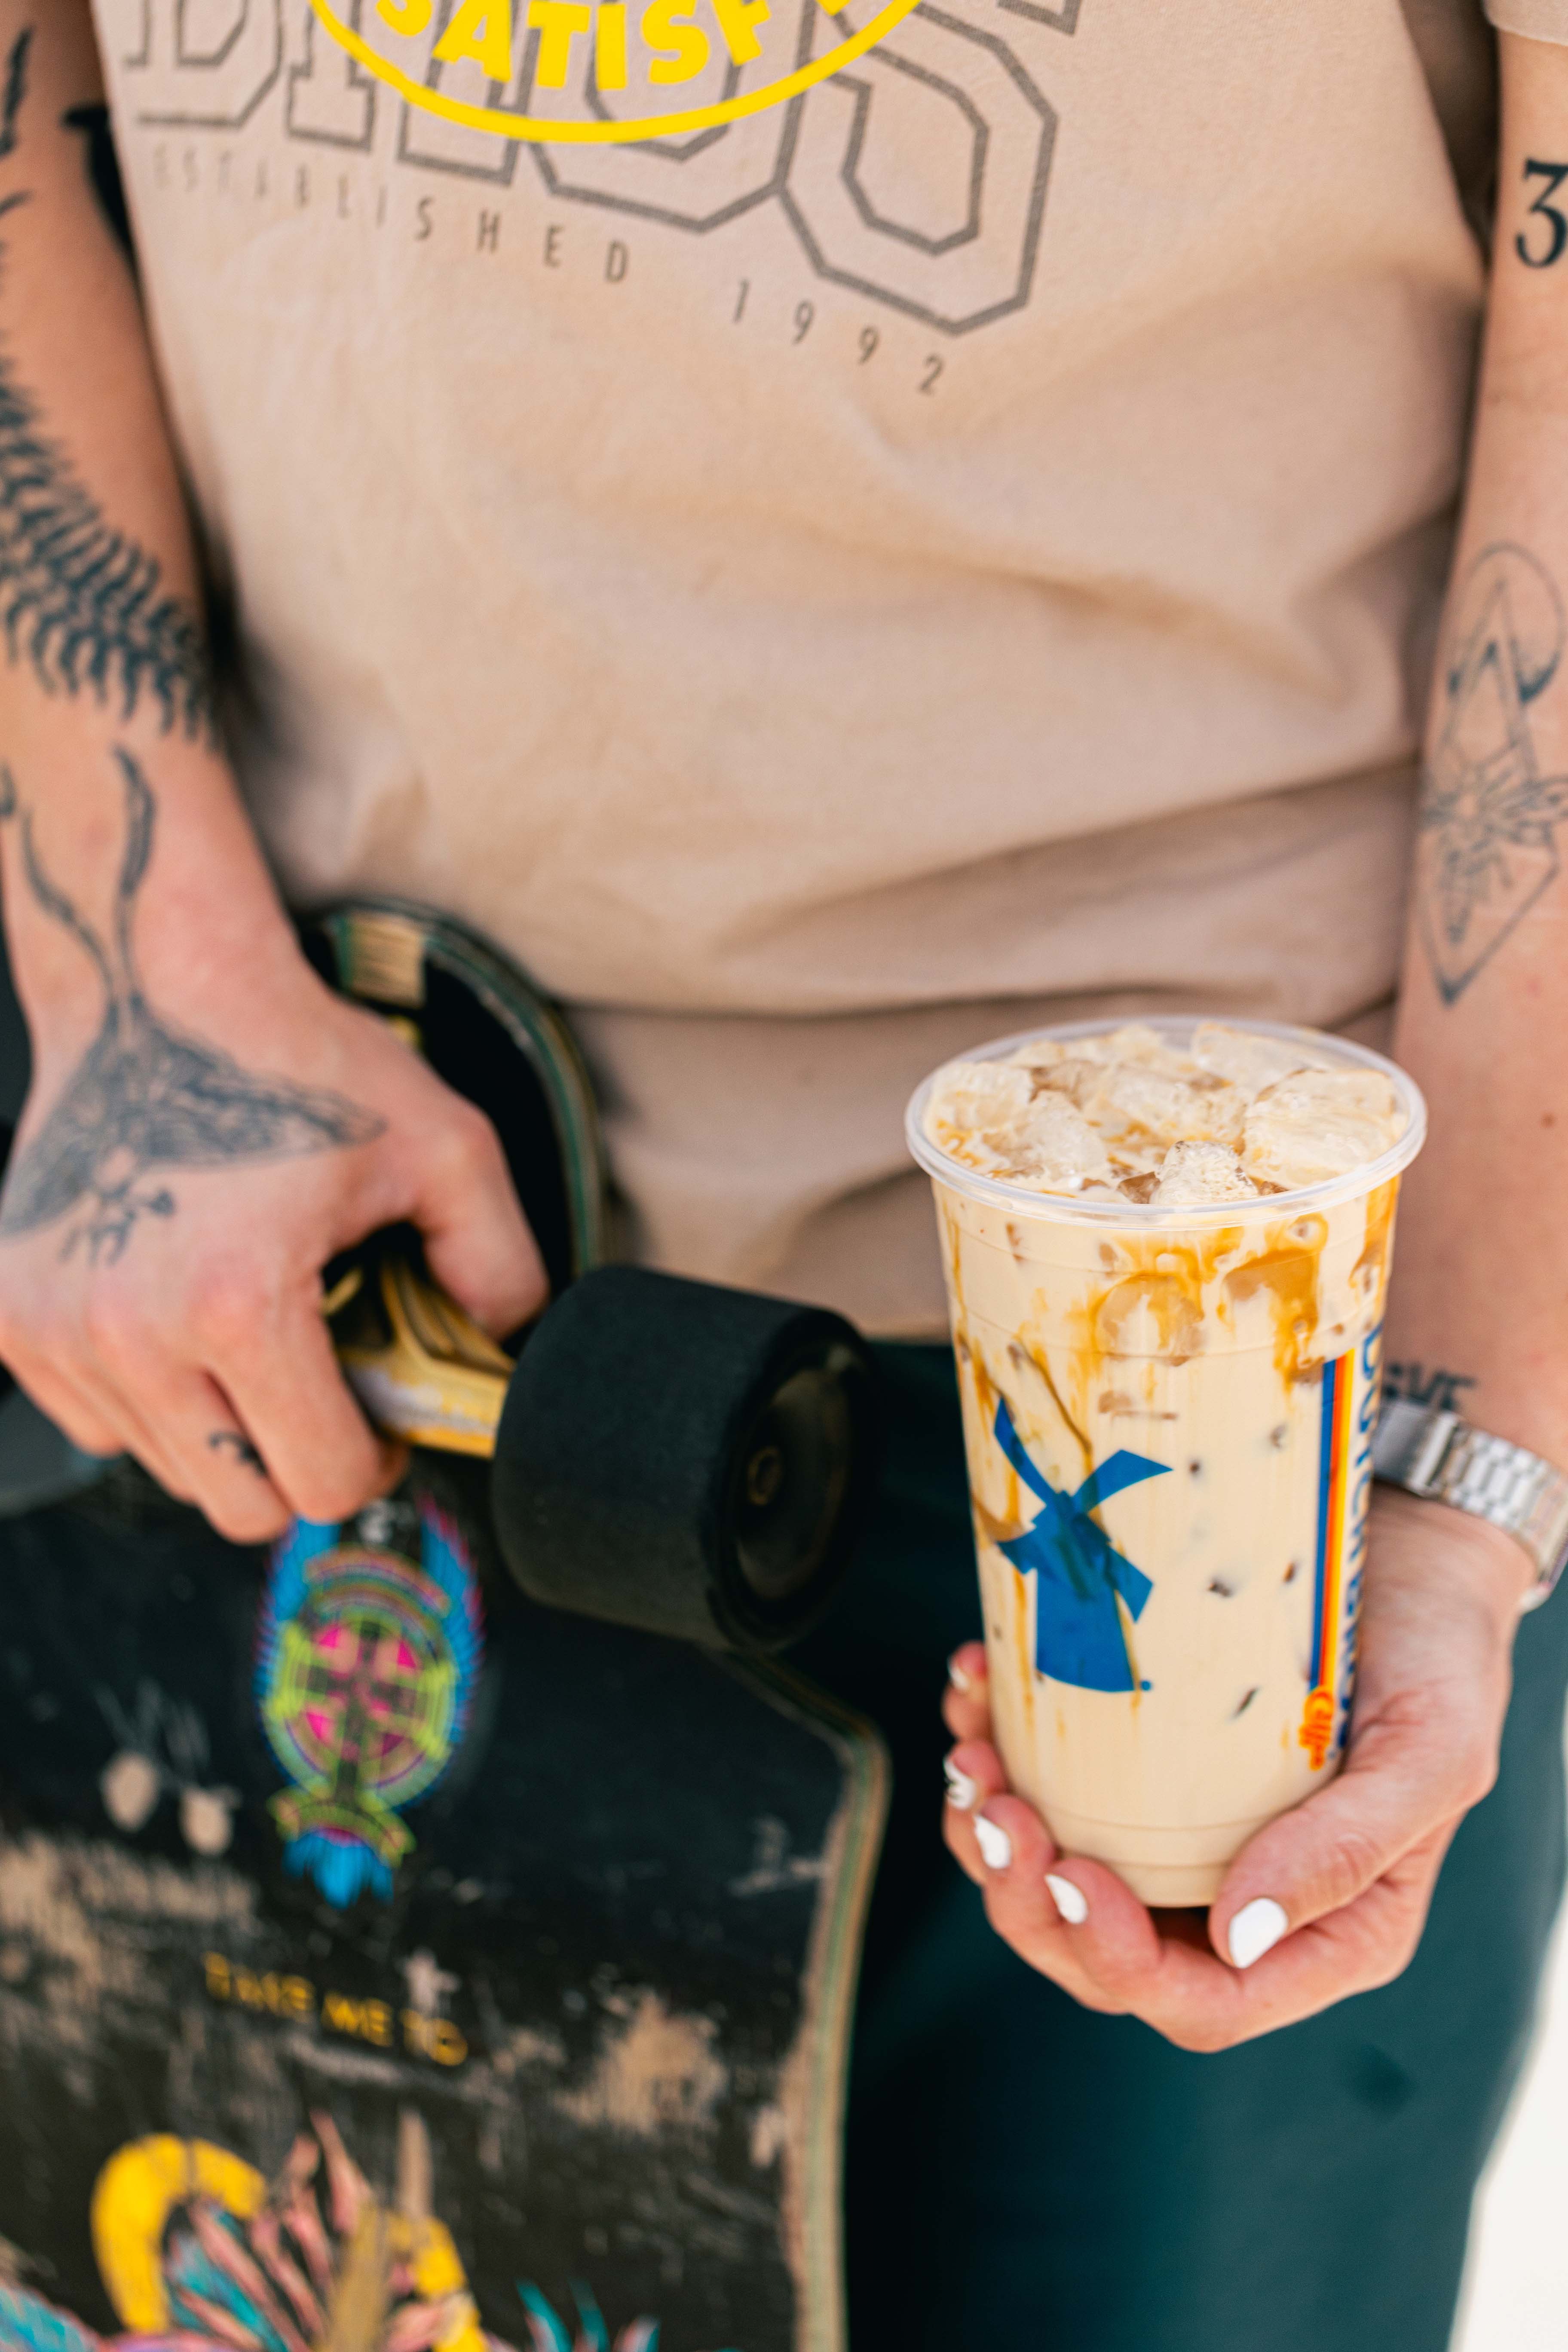 Try the Golden Eagle coffee featuring the caramel drizzle of your dreams. Dutch Bros Coffee Fresno (541)955-4700